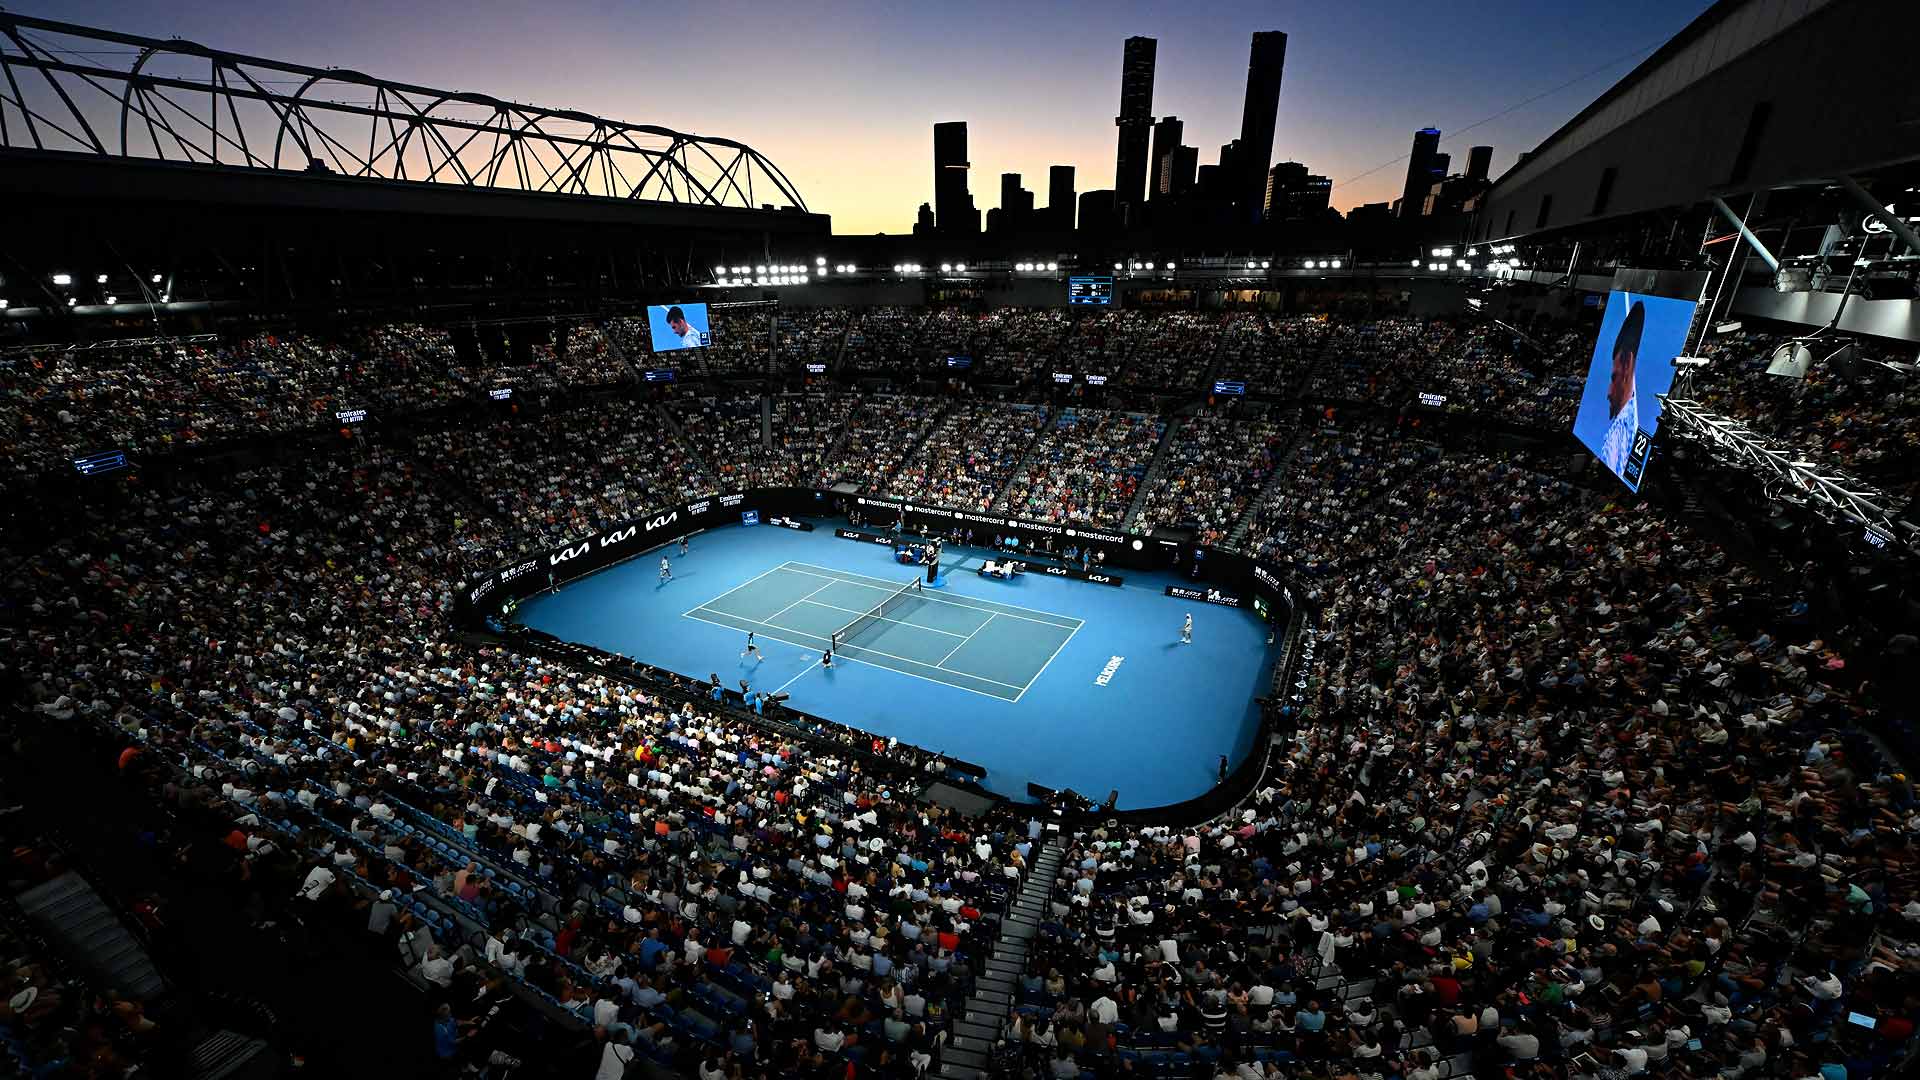 There will be $AU 86.5 million in prize money up for grabs at the 2024 Australian Open.